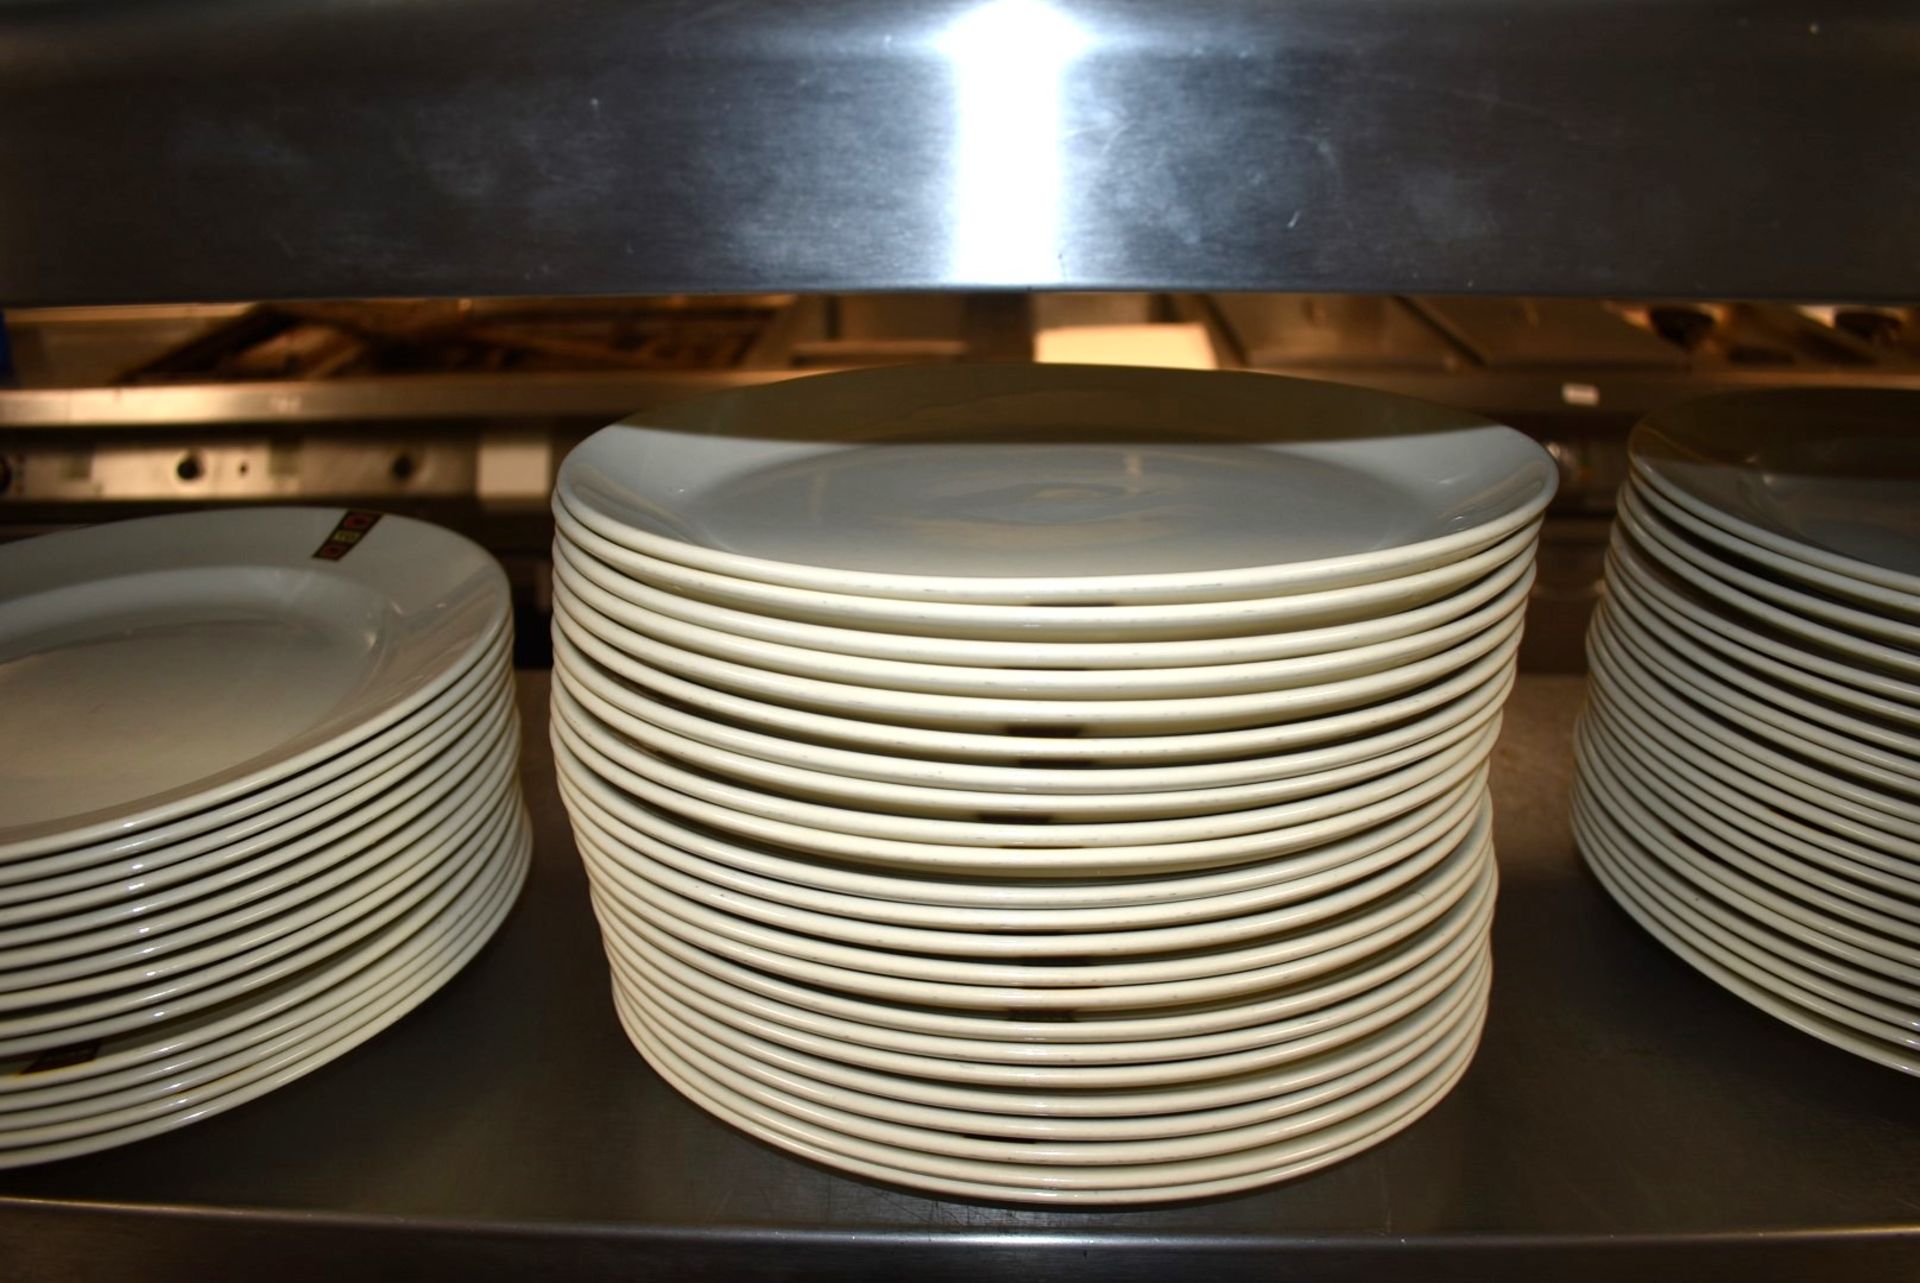 Approx 210 x Ceramic Dinner Plates - Various Sizes - From a Popular American Diner - Image 7 of 8